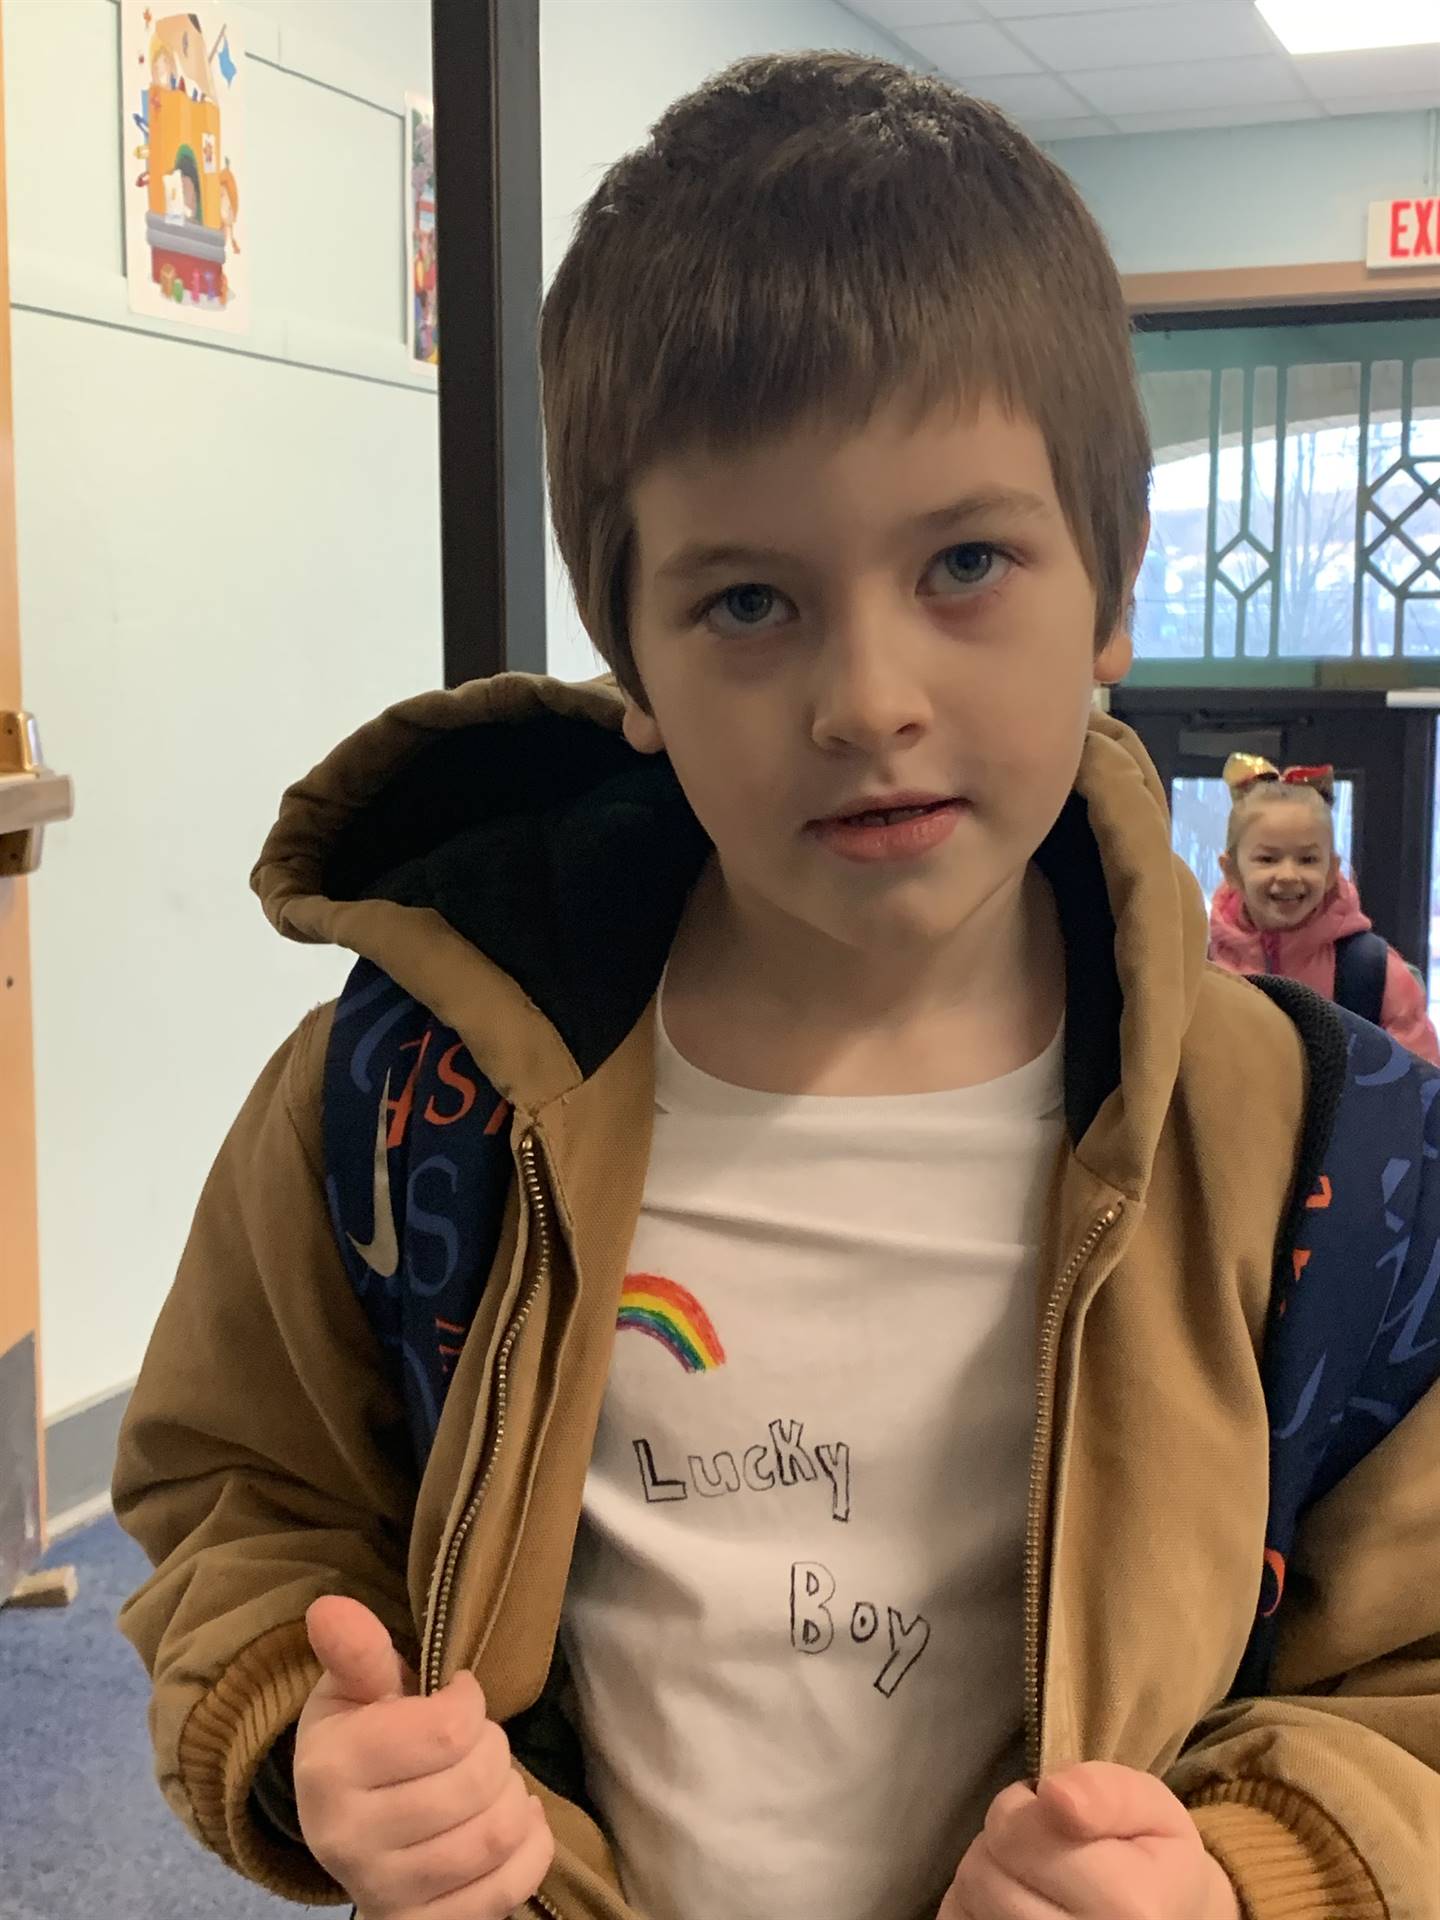 a student shows shirt that says "lucky boy" with a rainbow